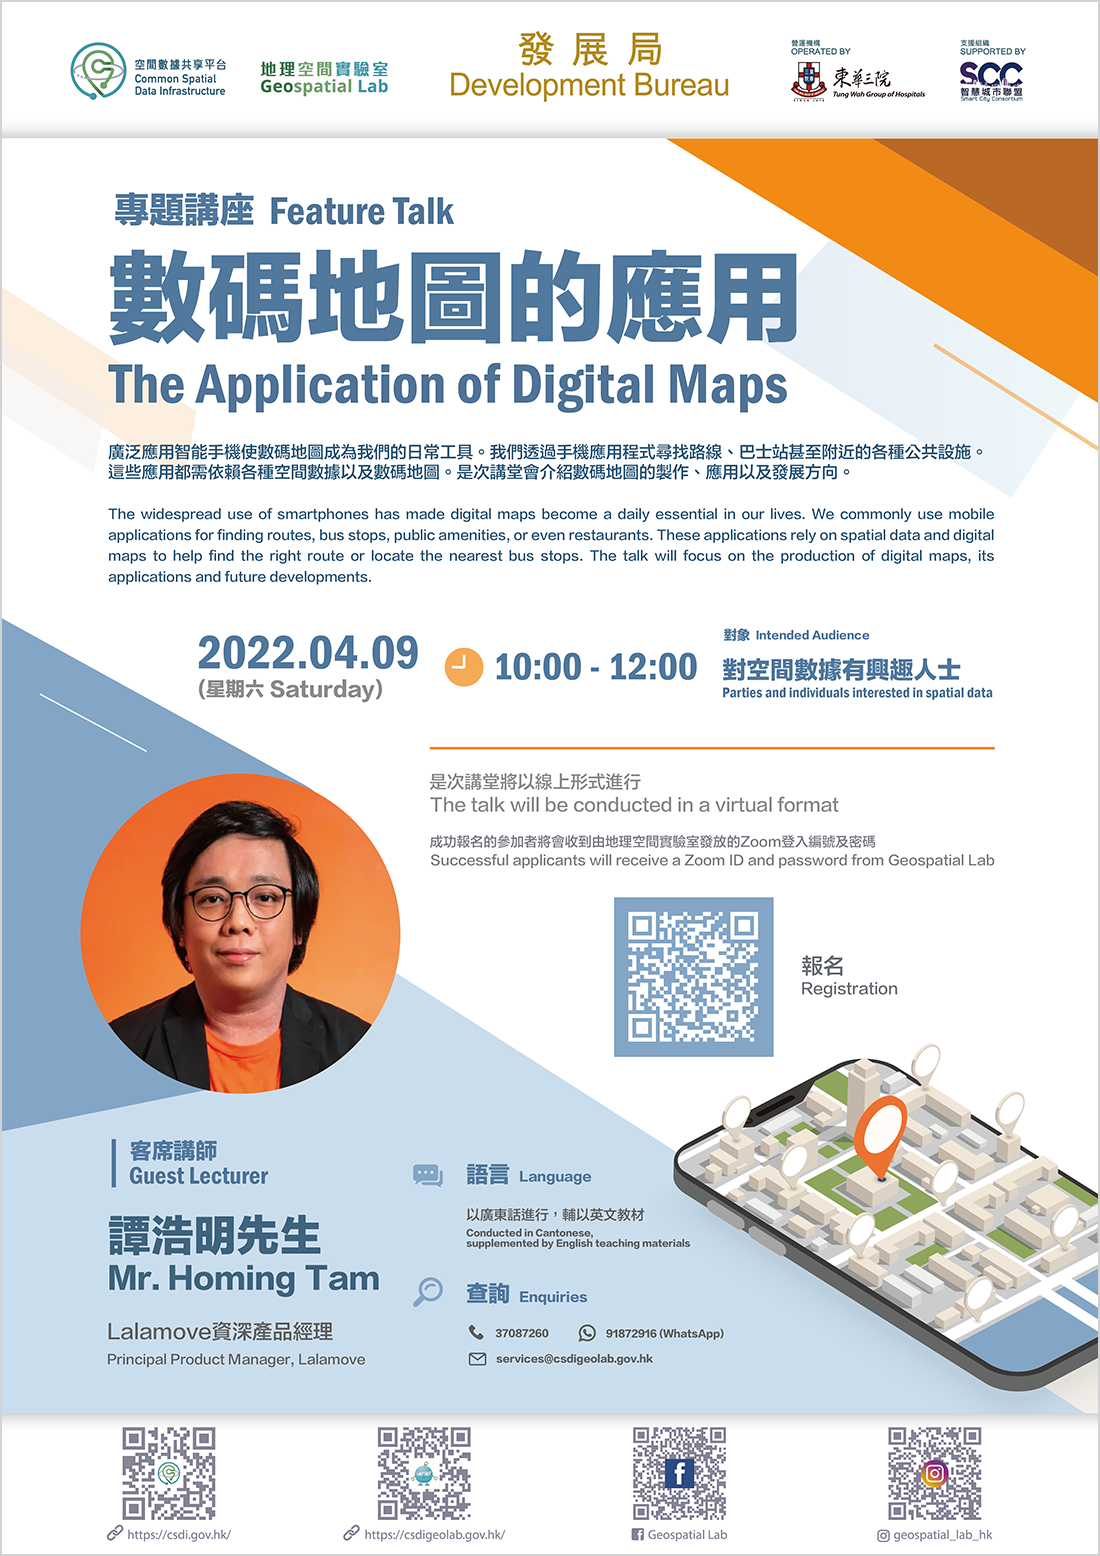 Feature Talk - The Application of Digital Maps